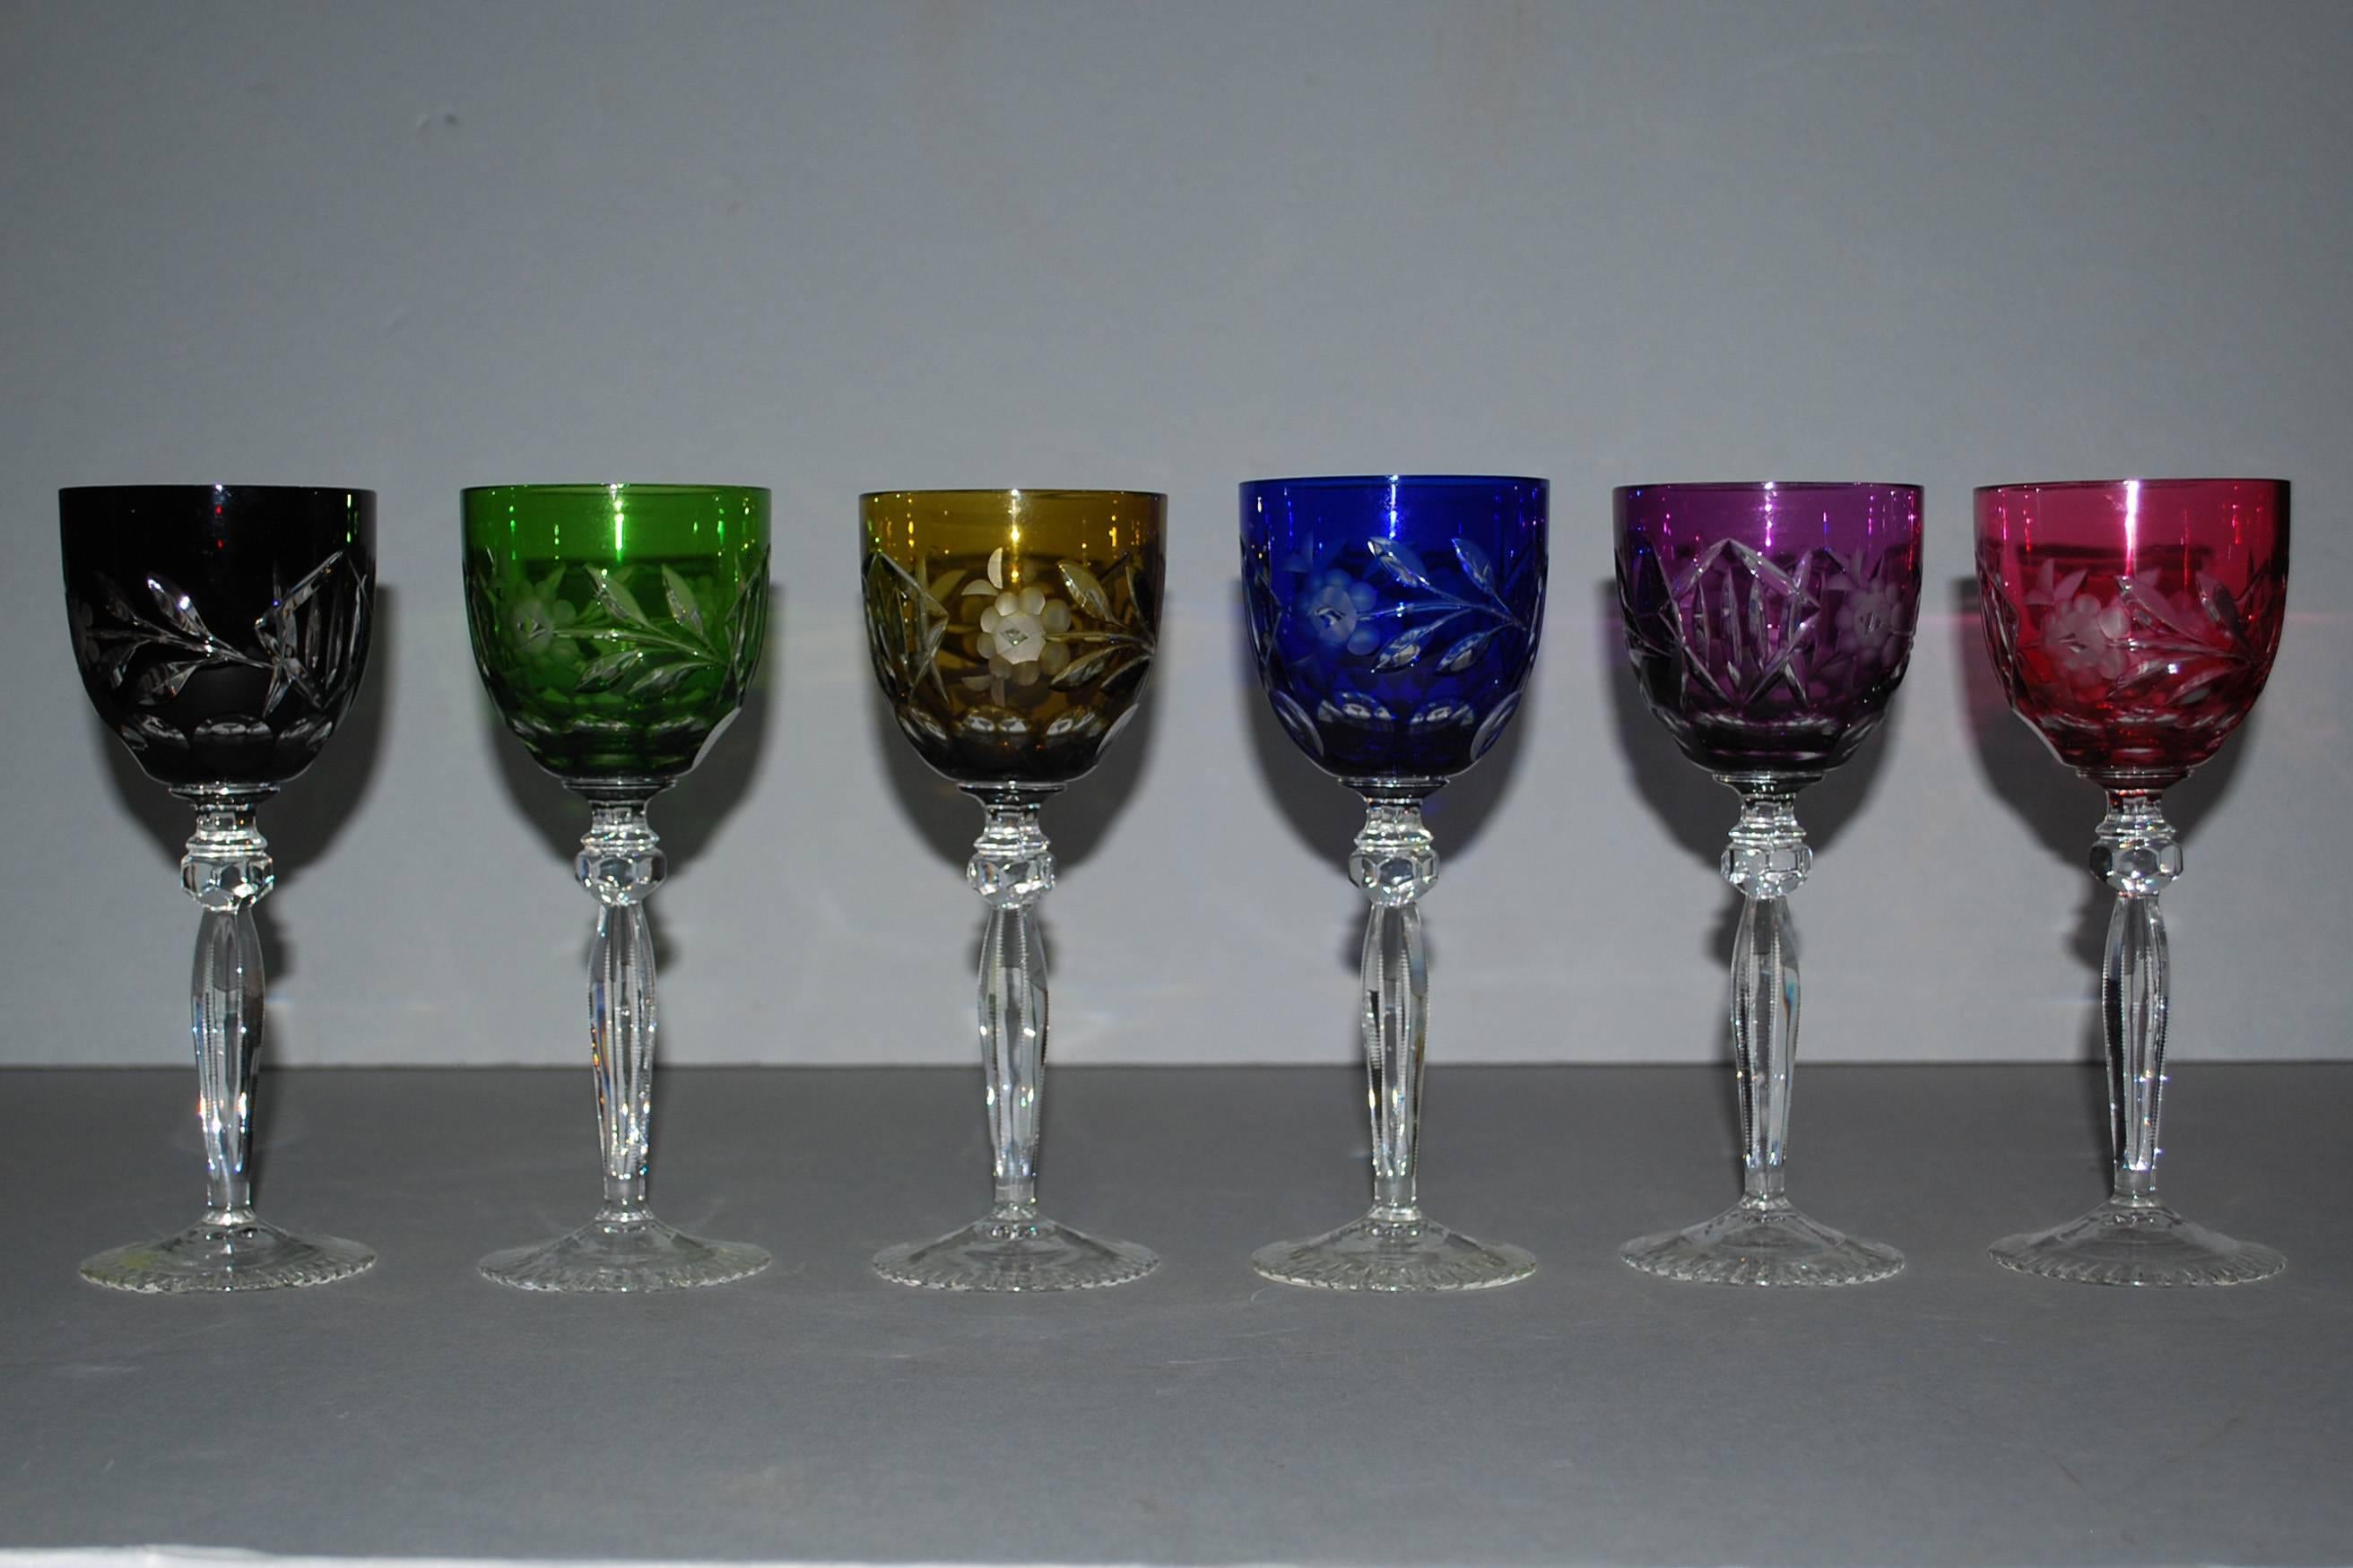 Lot of 6 coloured and polished crystal glasses.
Beautiful vibrant colours
Originates Germany, dating app.1950
(shipping costs on request, depends on destination) 